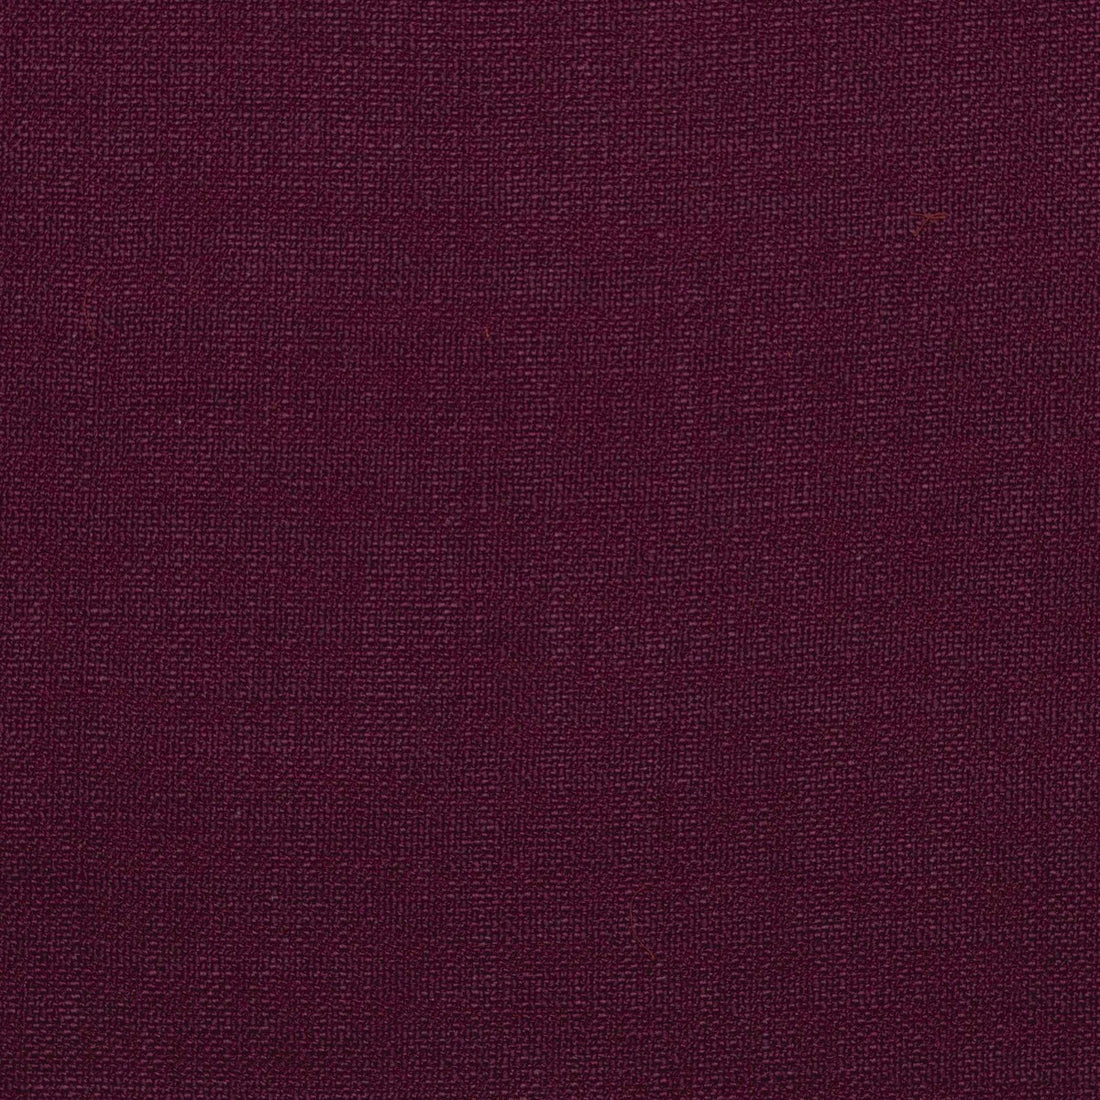 Shaba fabric in vino color - pattern GDT5428.12.0 - by Gaston y Daniela in the Gaston Africalia collection